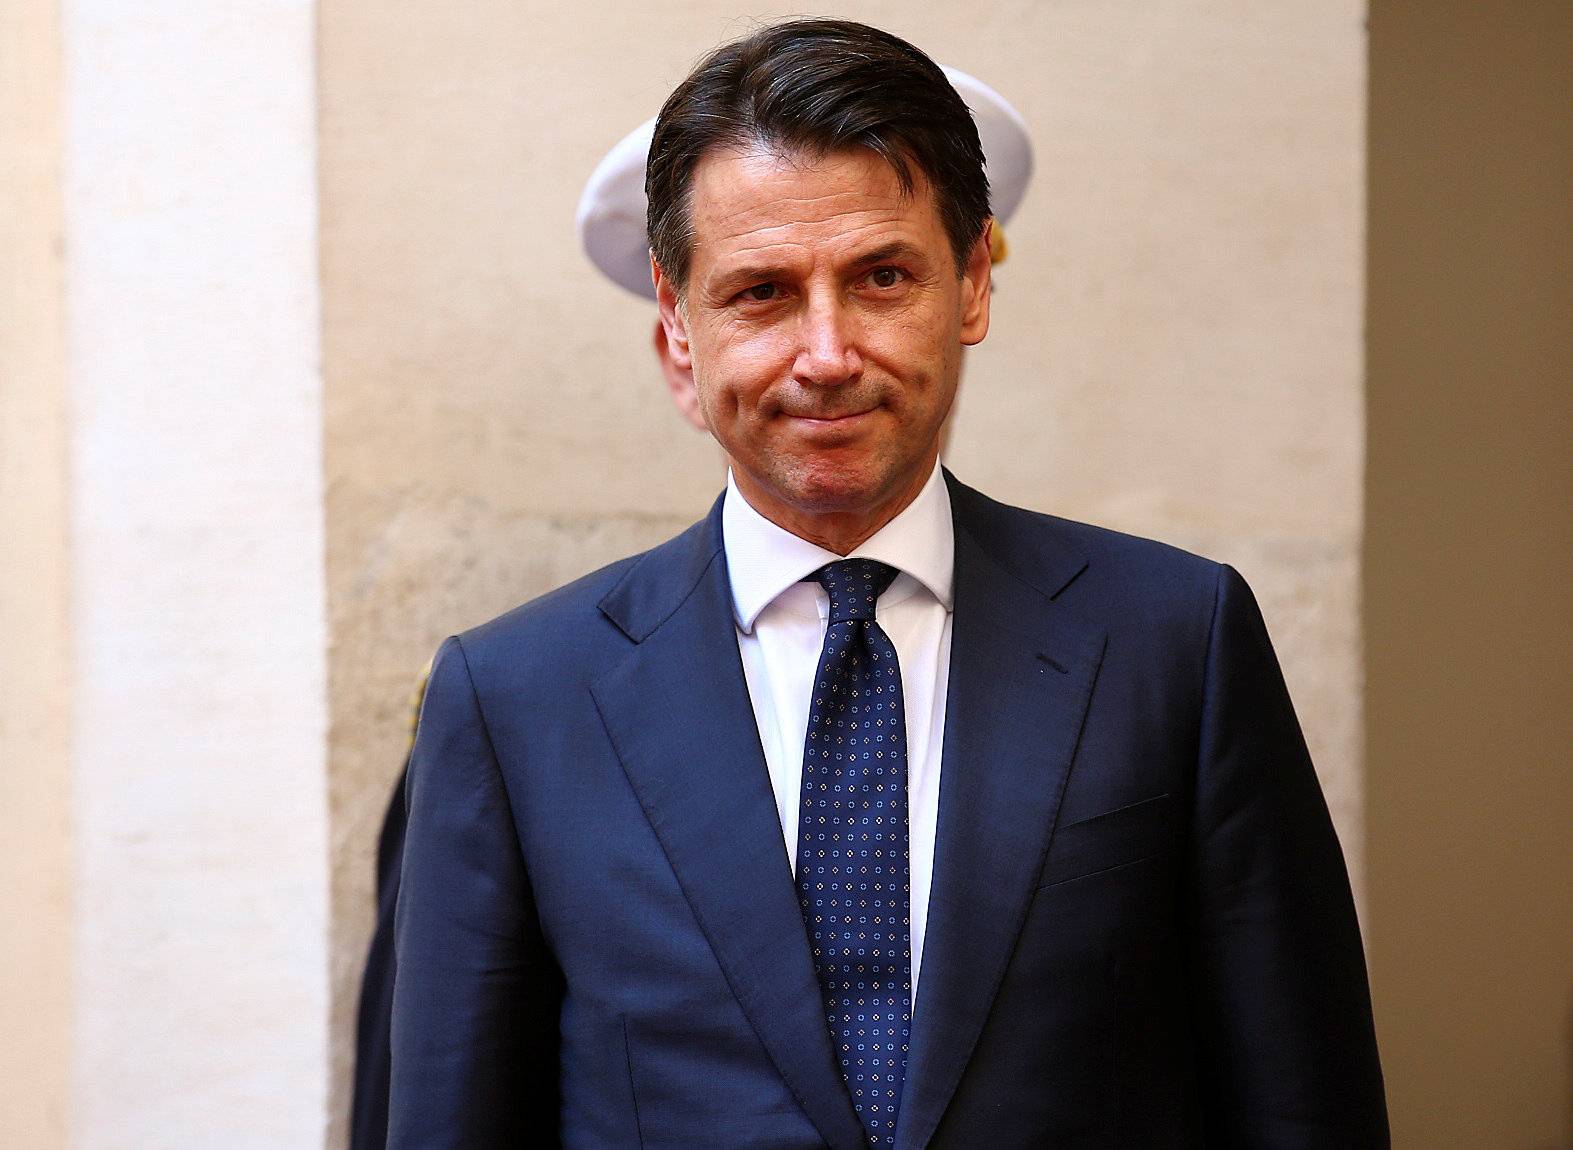 Italy's Prime Minister-designate Giuseppe Conte review the guard of honour at Chigi palace in Rome